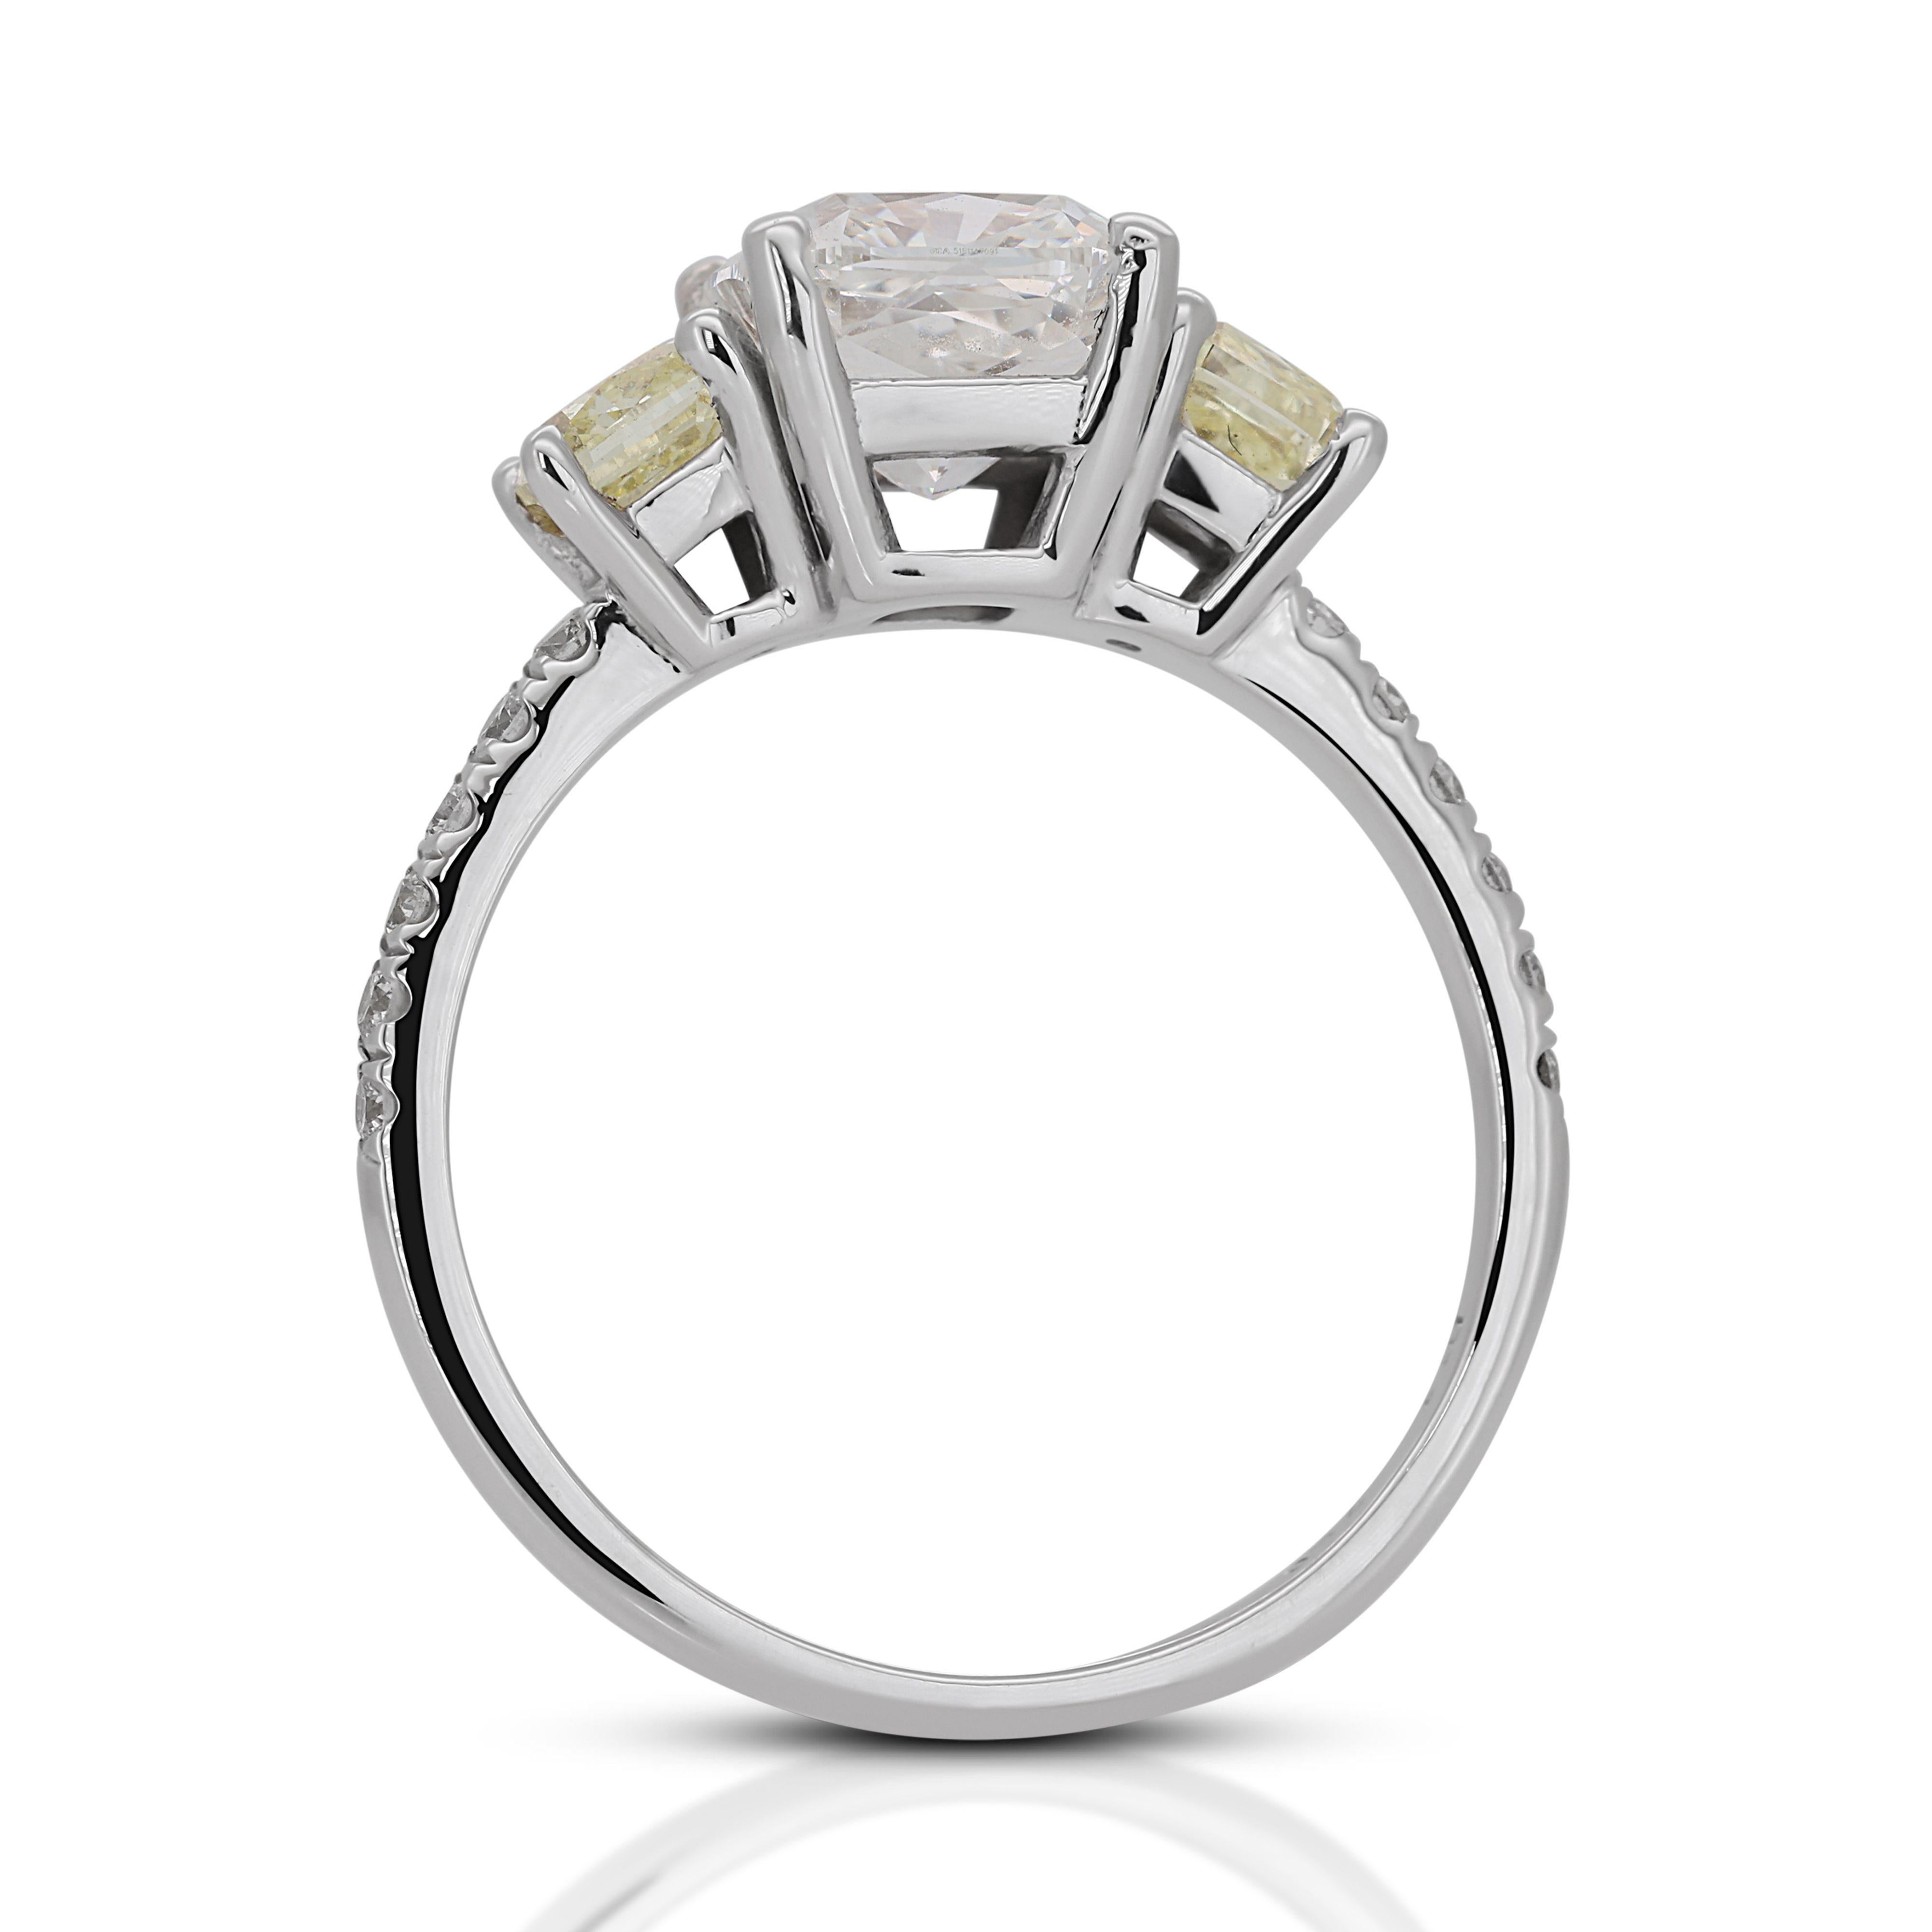 Women's Dazzling 18k White Gold 3 Stone Ring with 2.57 ct Natural Diamonds GIA Cert For Sale